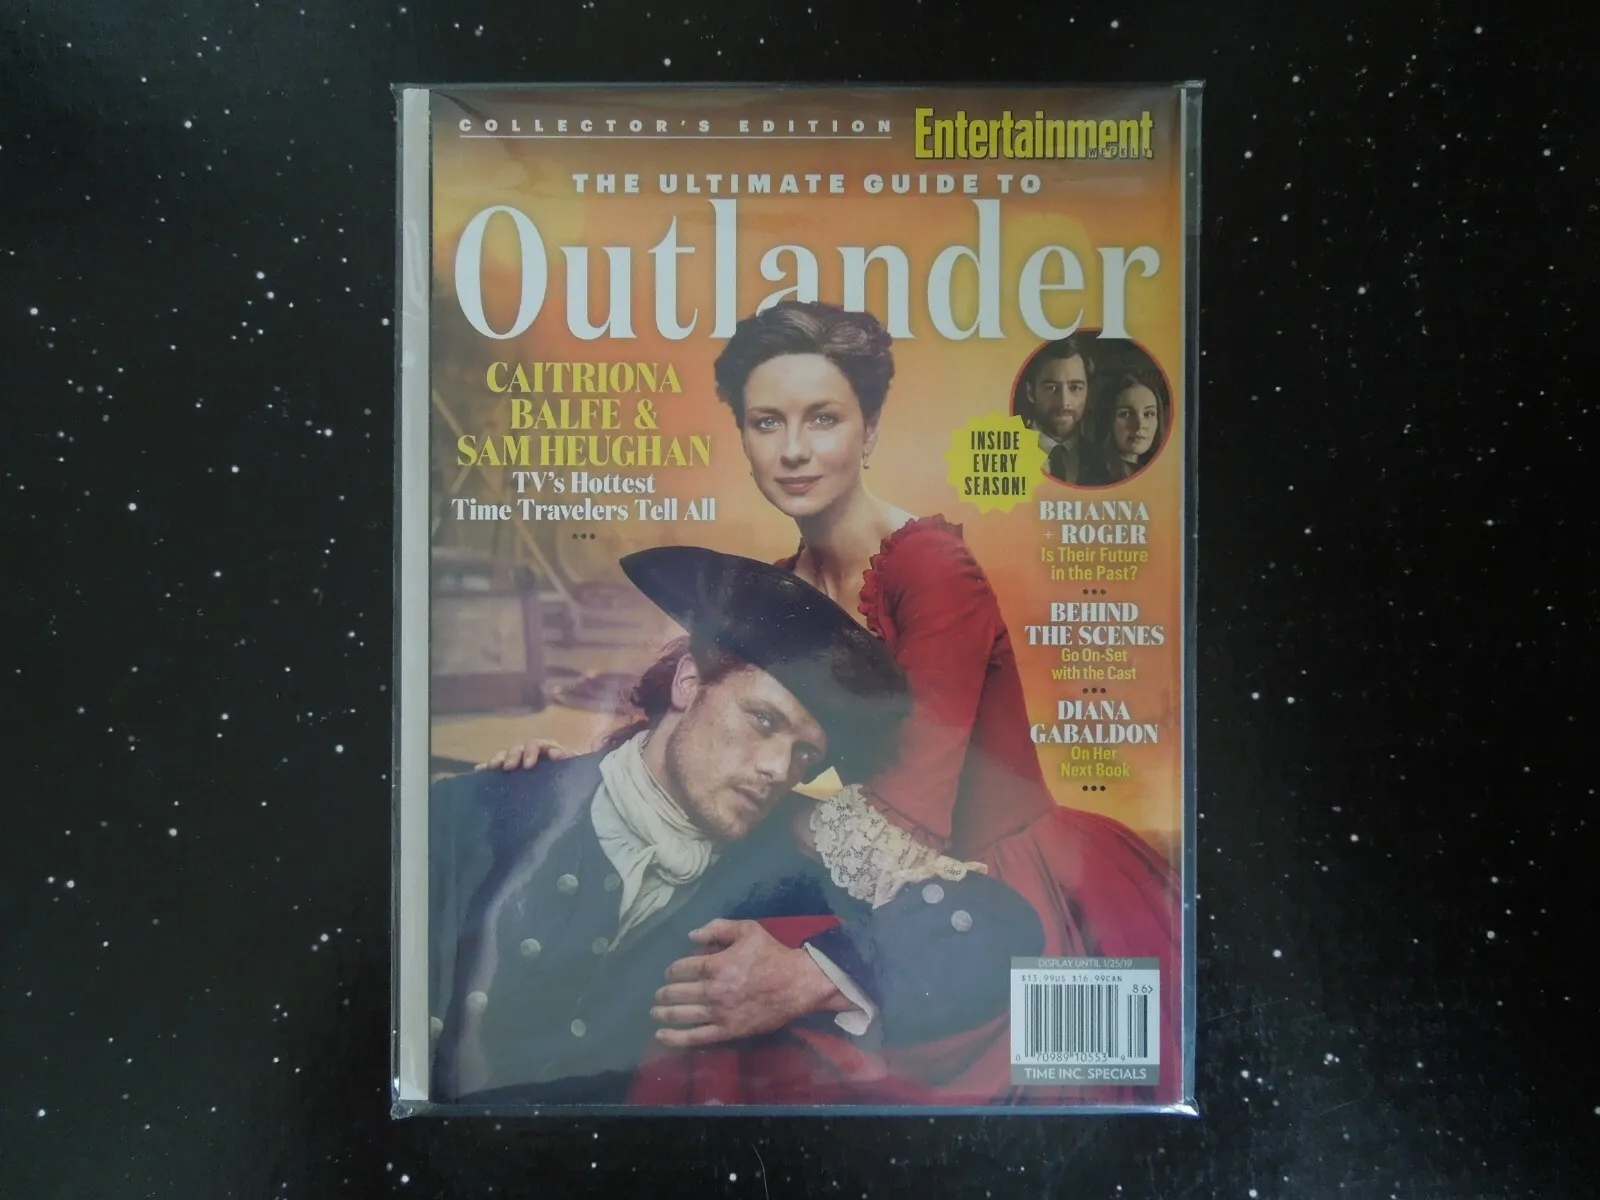 The Ultimate Guide To Outlander - Collector's Edition ( Ew )